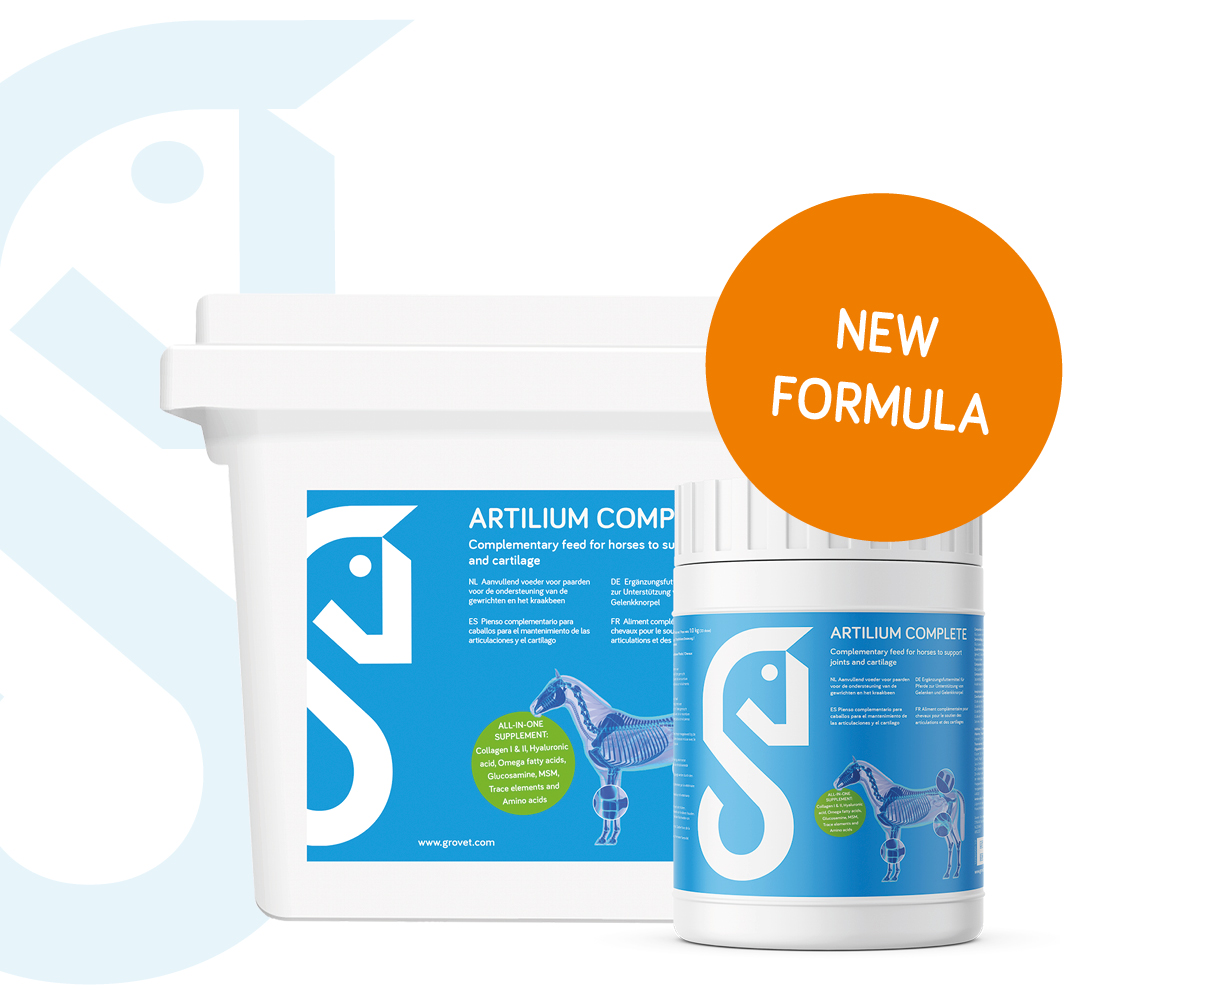 Our all-in-one supplement Artilium Complete with improved formula